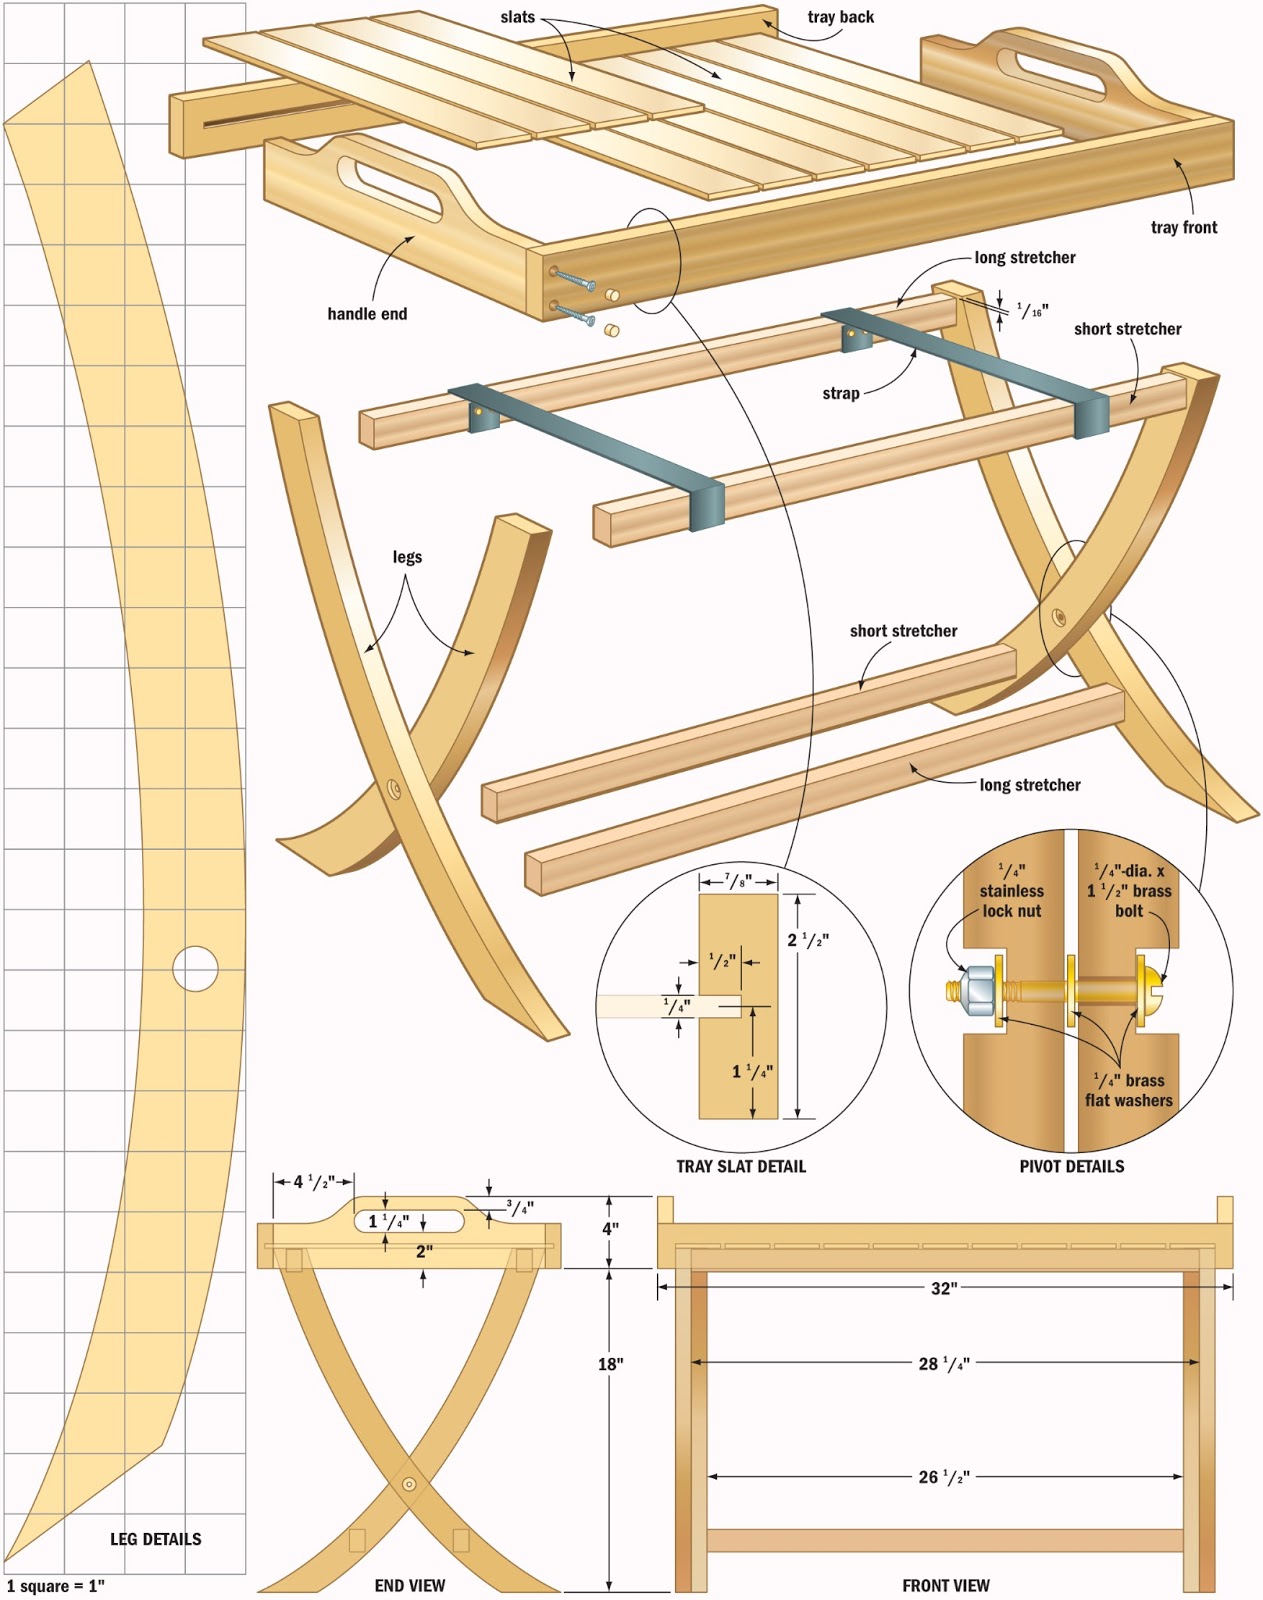 Ted’s Woodworking Reviews Honest Verdict - Does 16,000 Woodworking Plans Work? PDF Download!